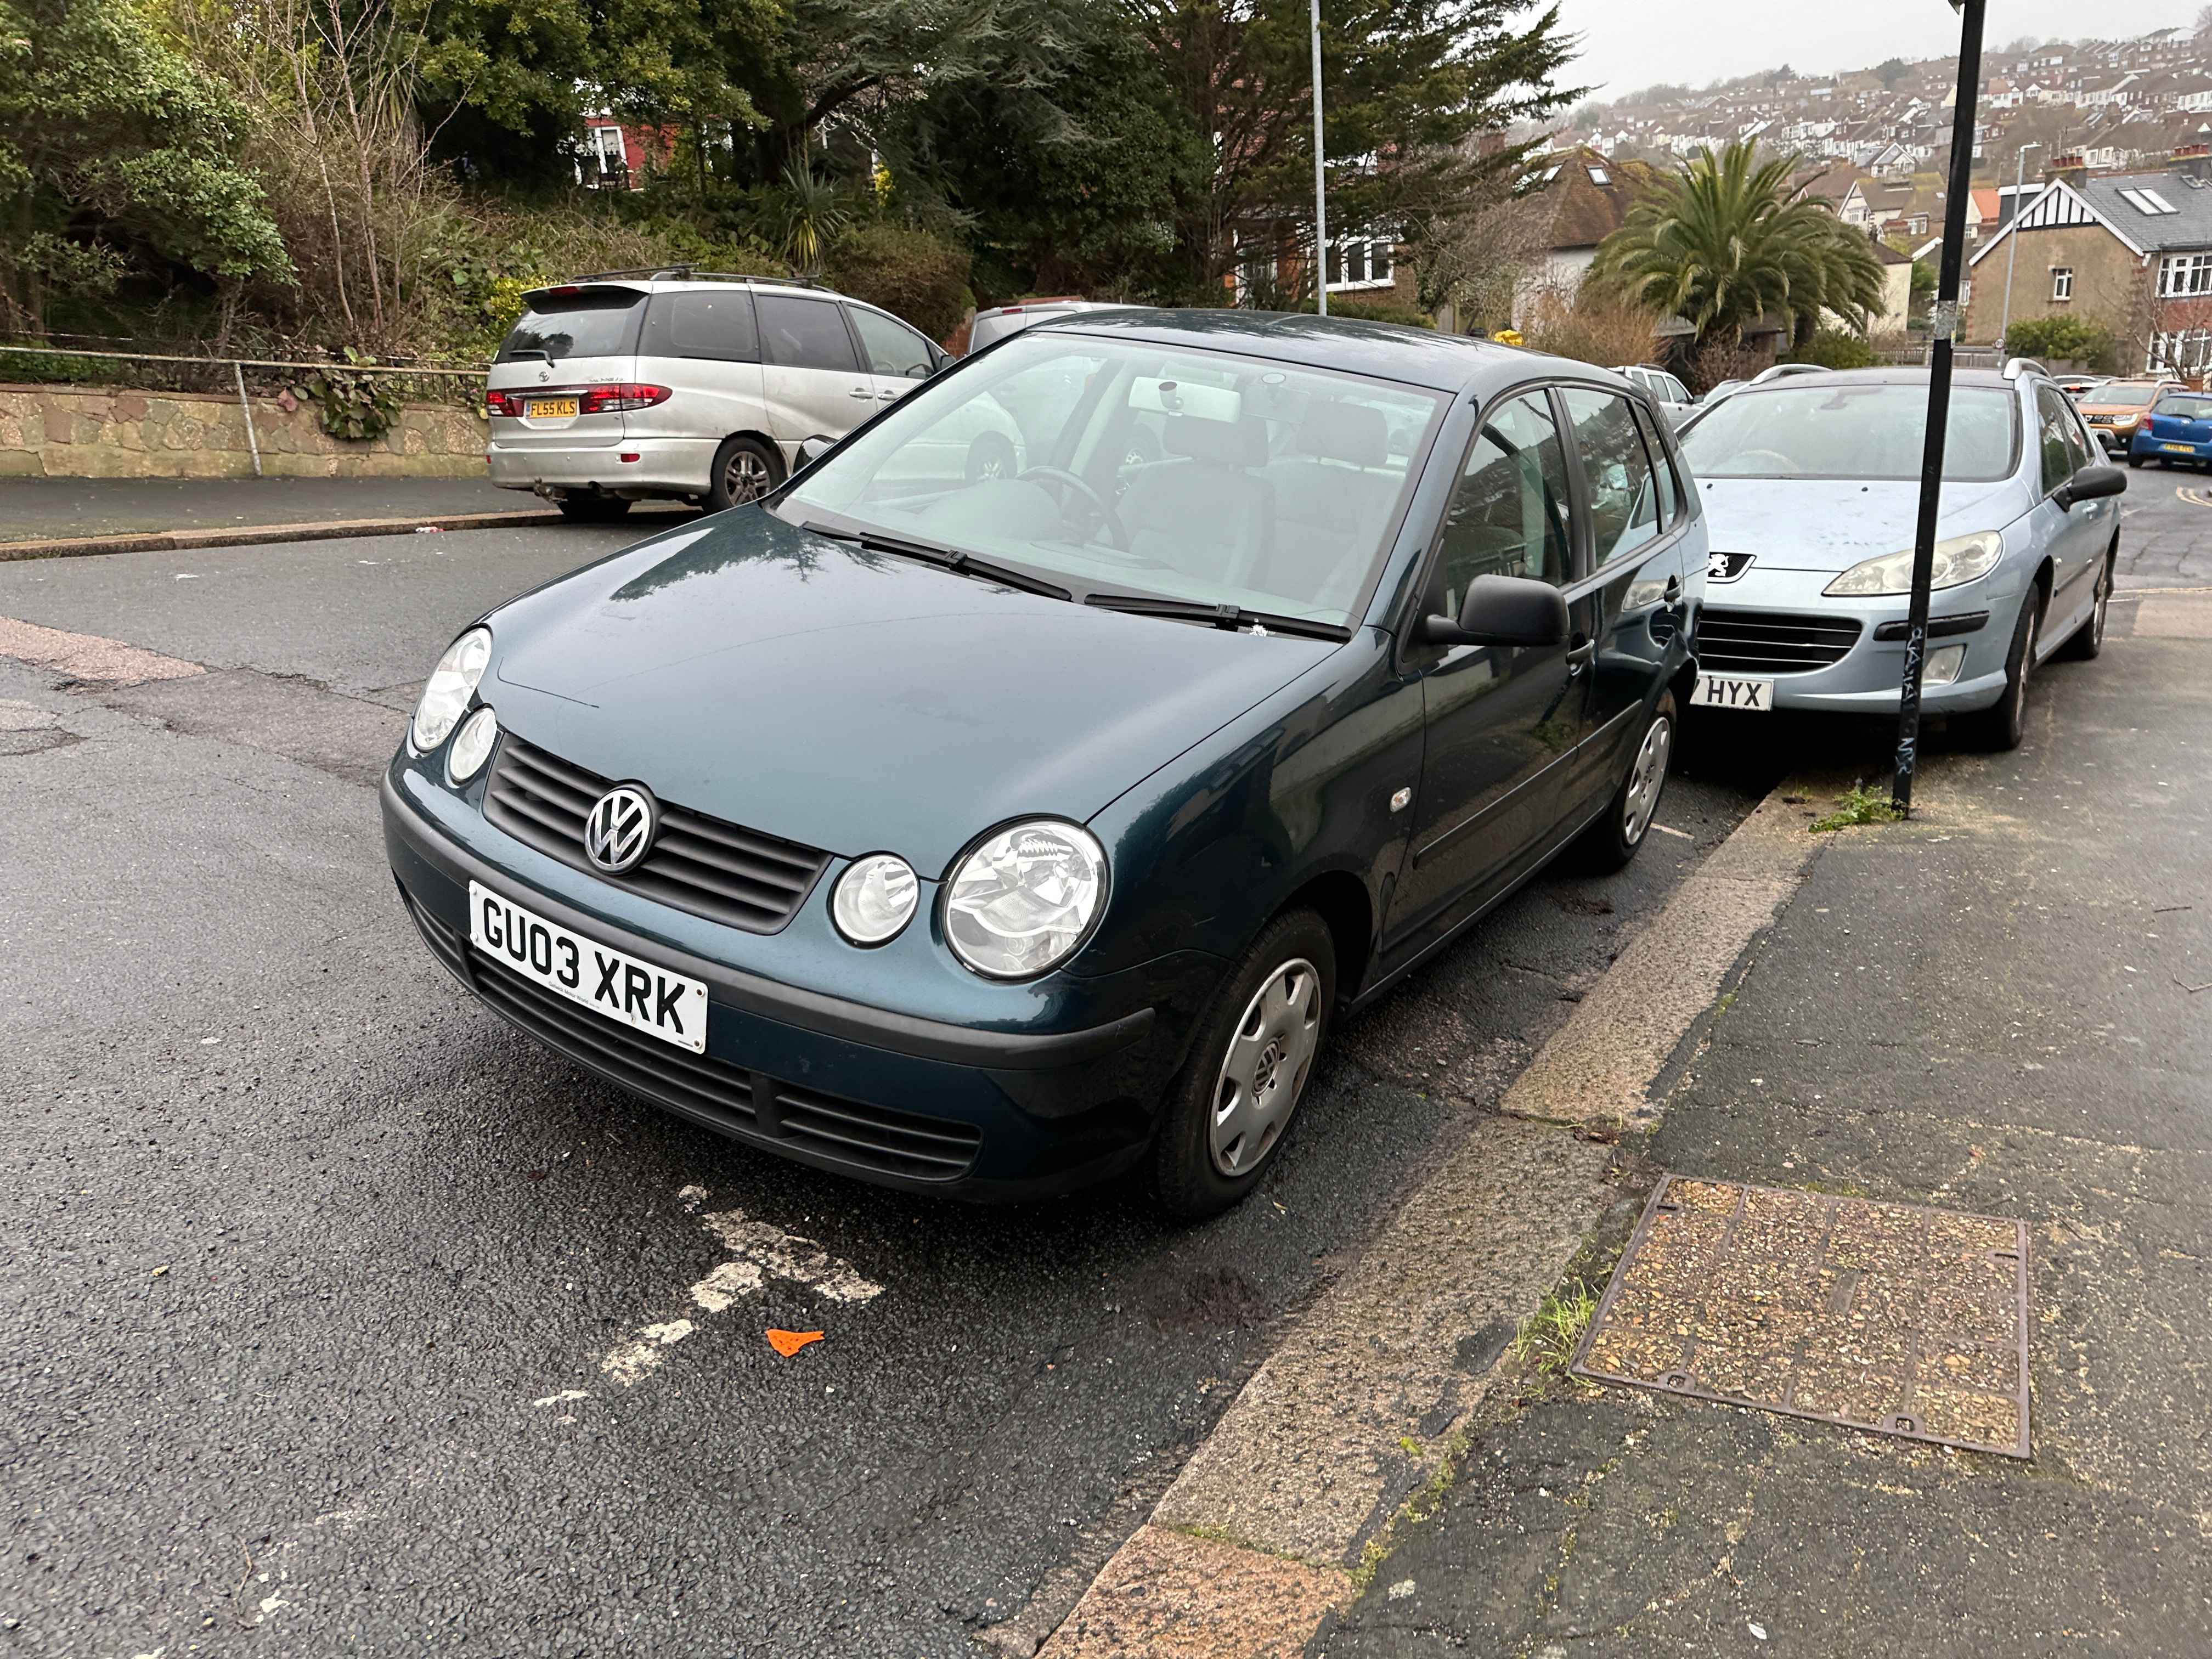 Photograph of GU03 XRK - a Green Volkswagen Polo parked in Hollingdean by a non-resident. The eighth of eight photographs supplied by the residents of Hollingdean.